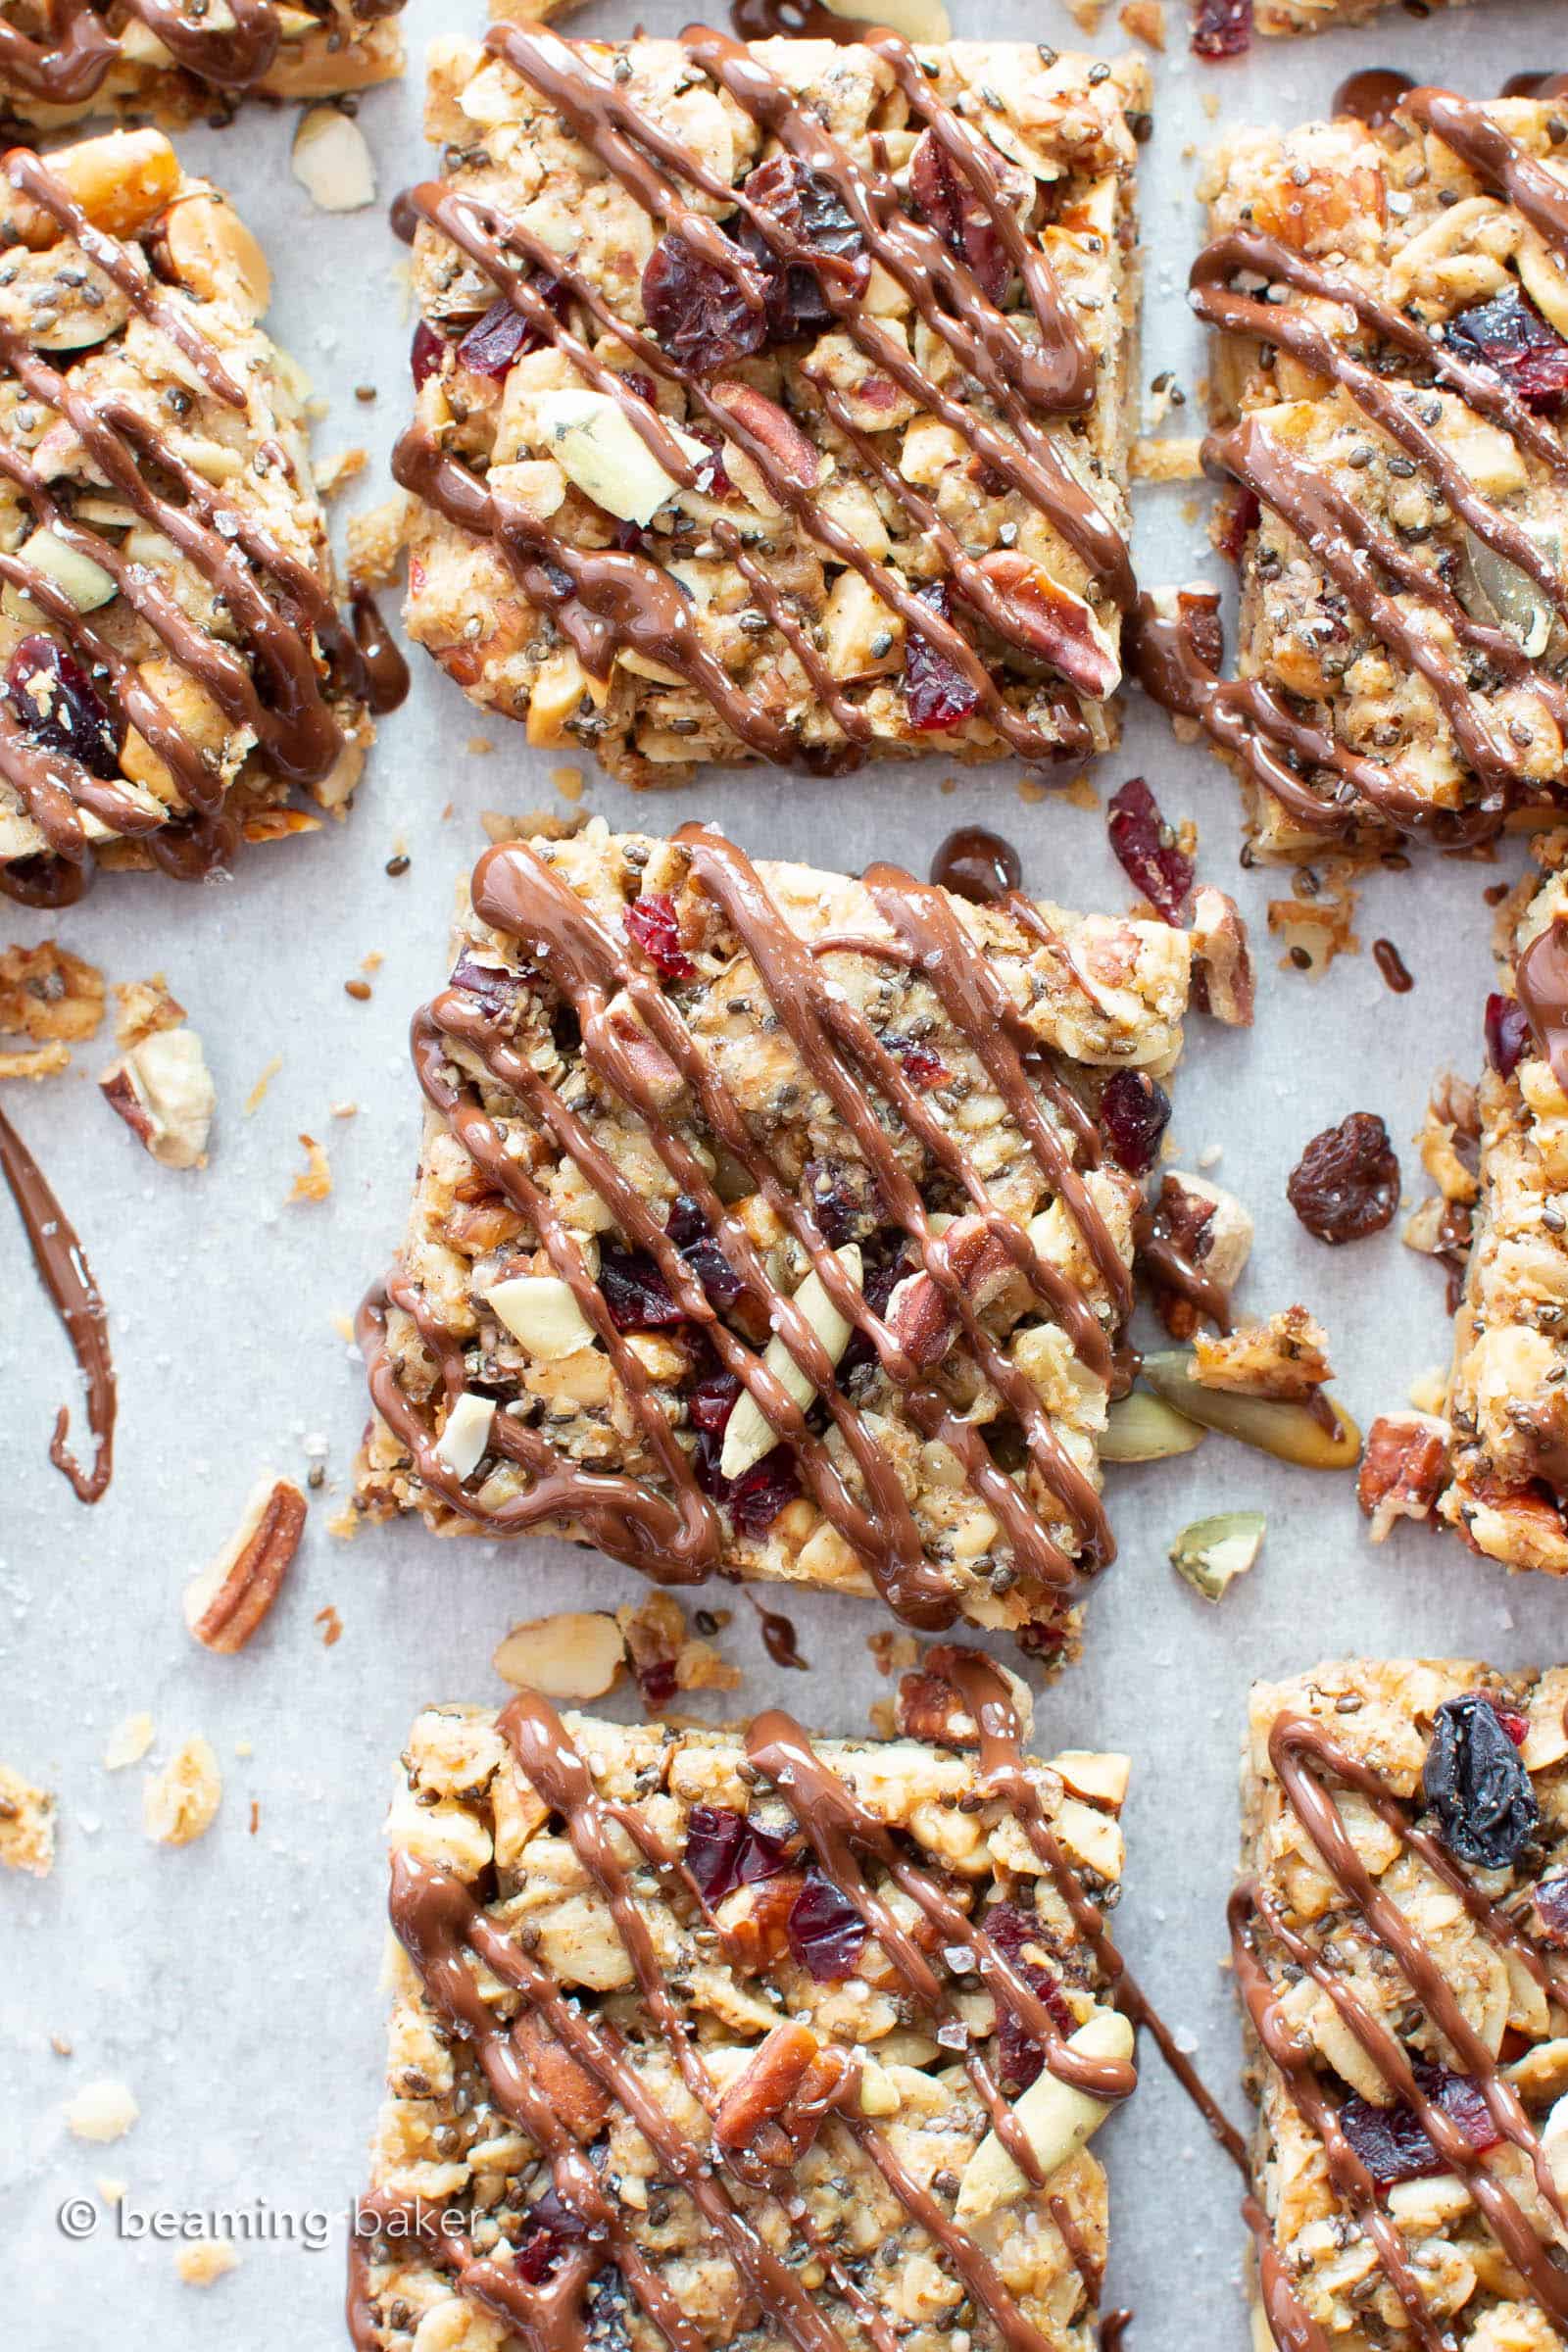 Salted Chia Chocolate Healthy Vegan Snack Bars: the best vegan snack bars recipe—chewy & delicious, packed with nutty crunch and EASY to make! Gluten Free, Dairy-Free. #Snacks #Bars #Vegan #Healthy | Recipe at BeamingBaker.com